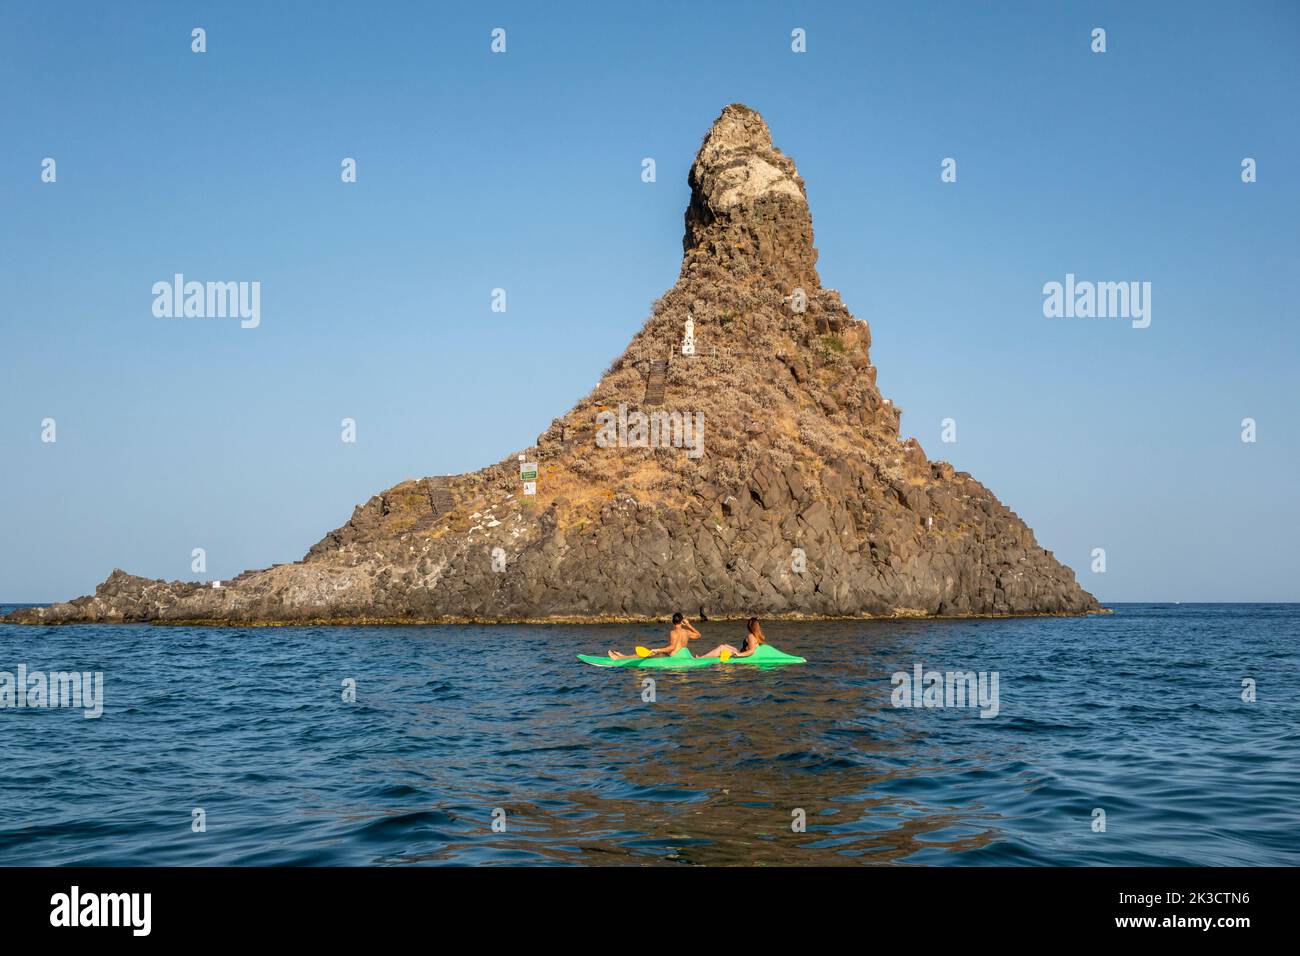 Two kayakers in front of Faraglione Grande, one of the Faraglioni or Isole dei Ciclopi, a group of volcanic basalt sea stacks off Aci Trezza, Sicily Stock Photo